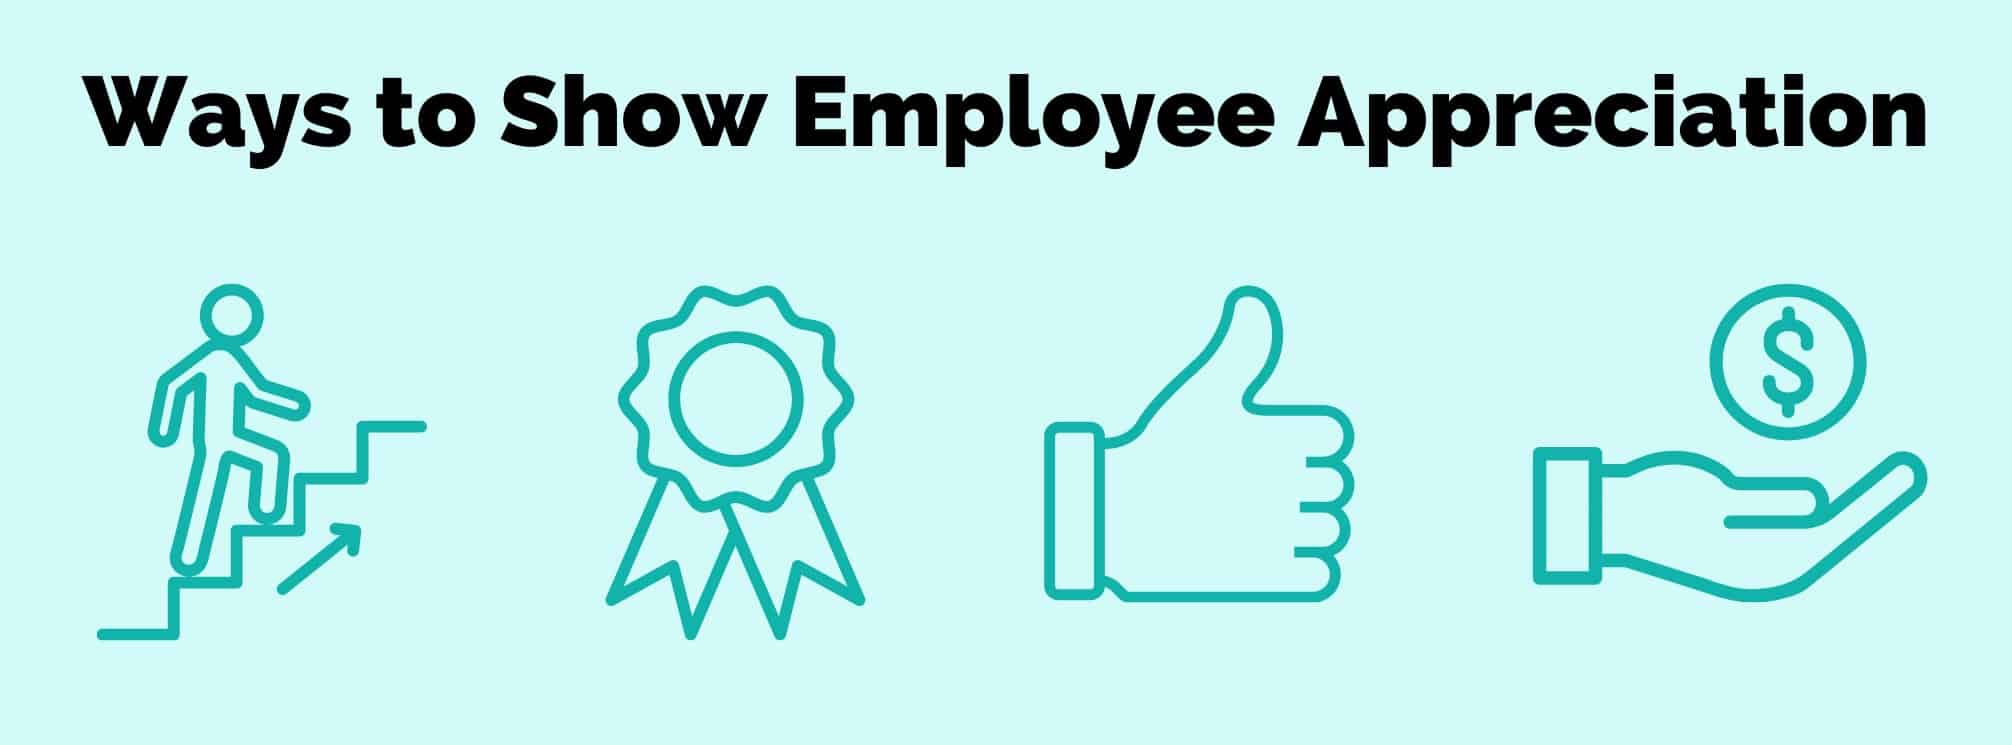 ways to show employee appreciation graphic with promotion icon, award icon, thumbs up icon, and money icon